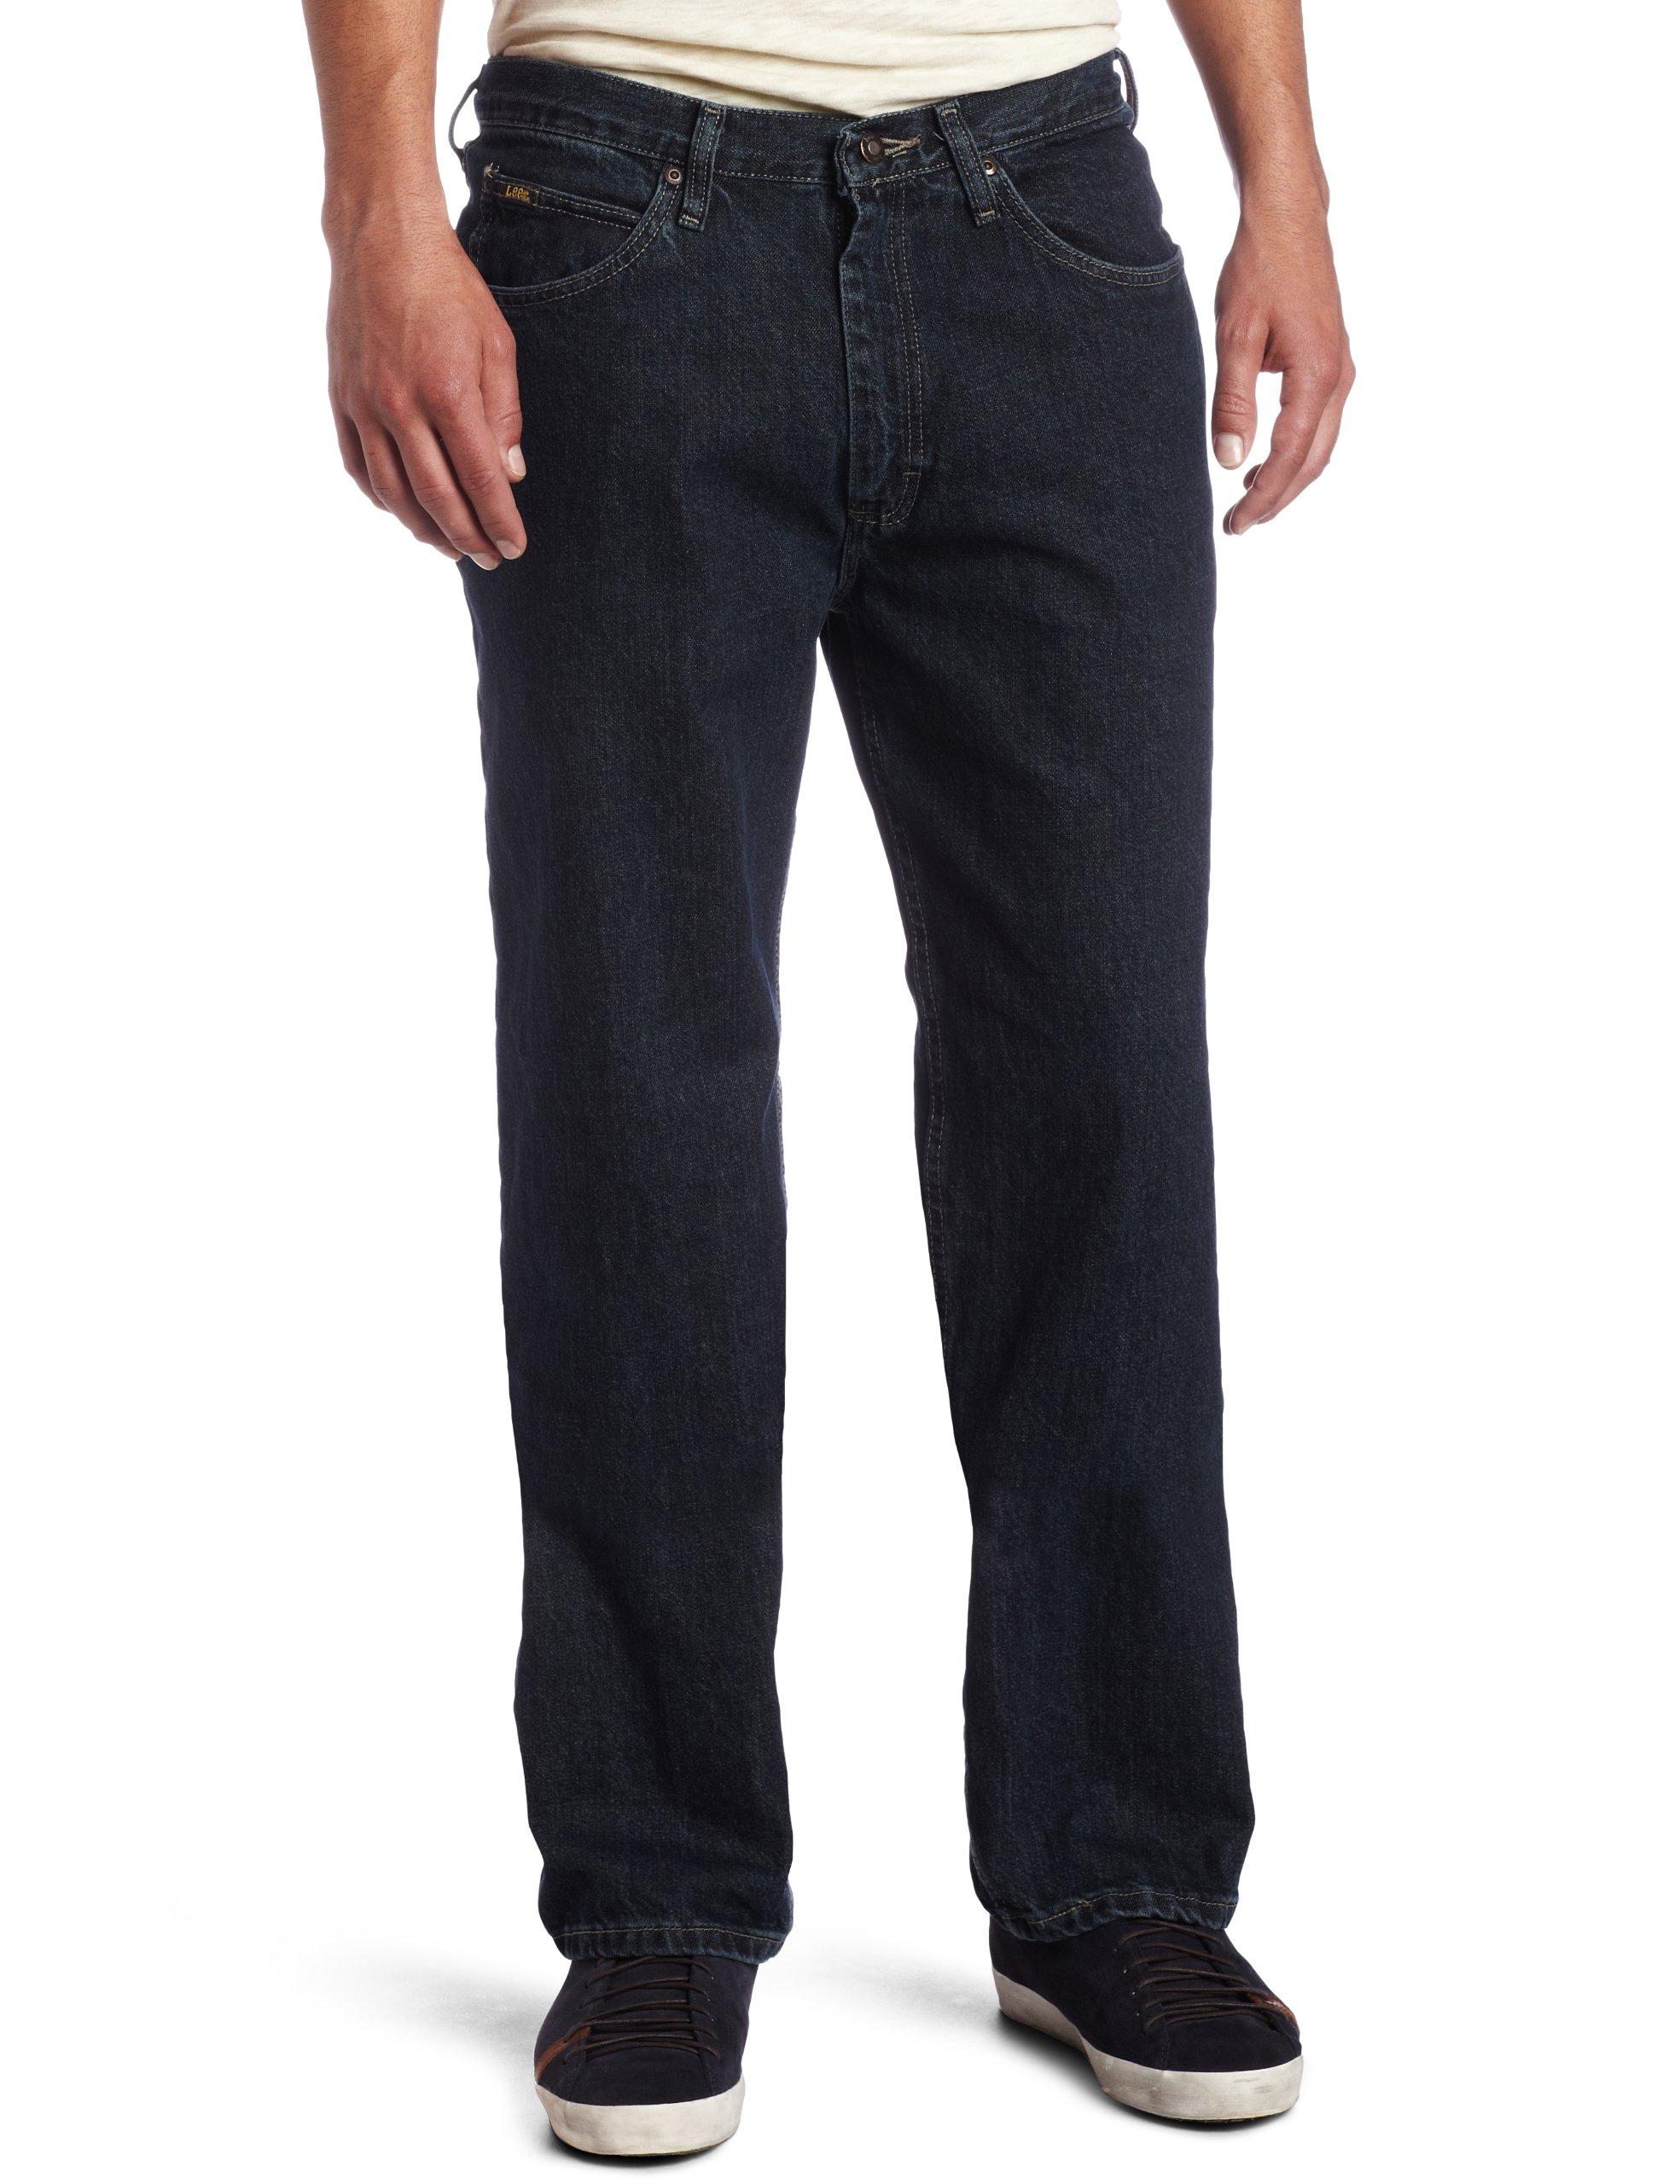 Lee Jeans Relaxed Fit Straight Leg Jean in Blue for Men - Save 44% - Lyst